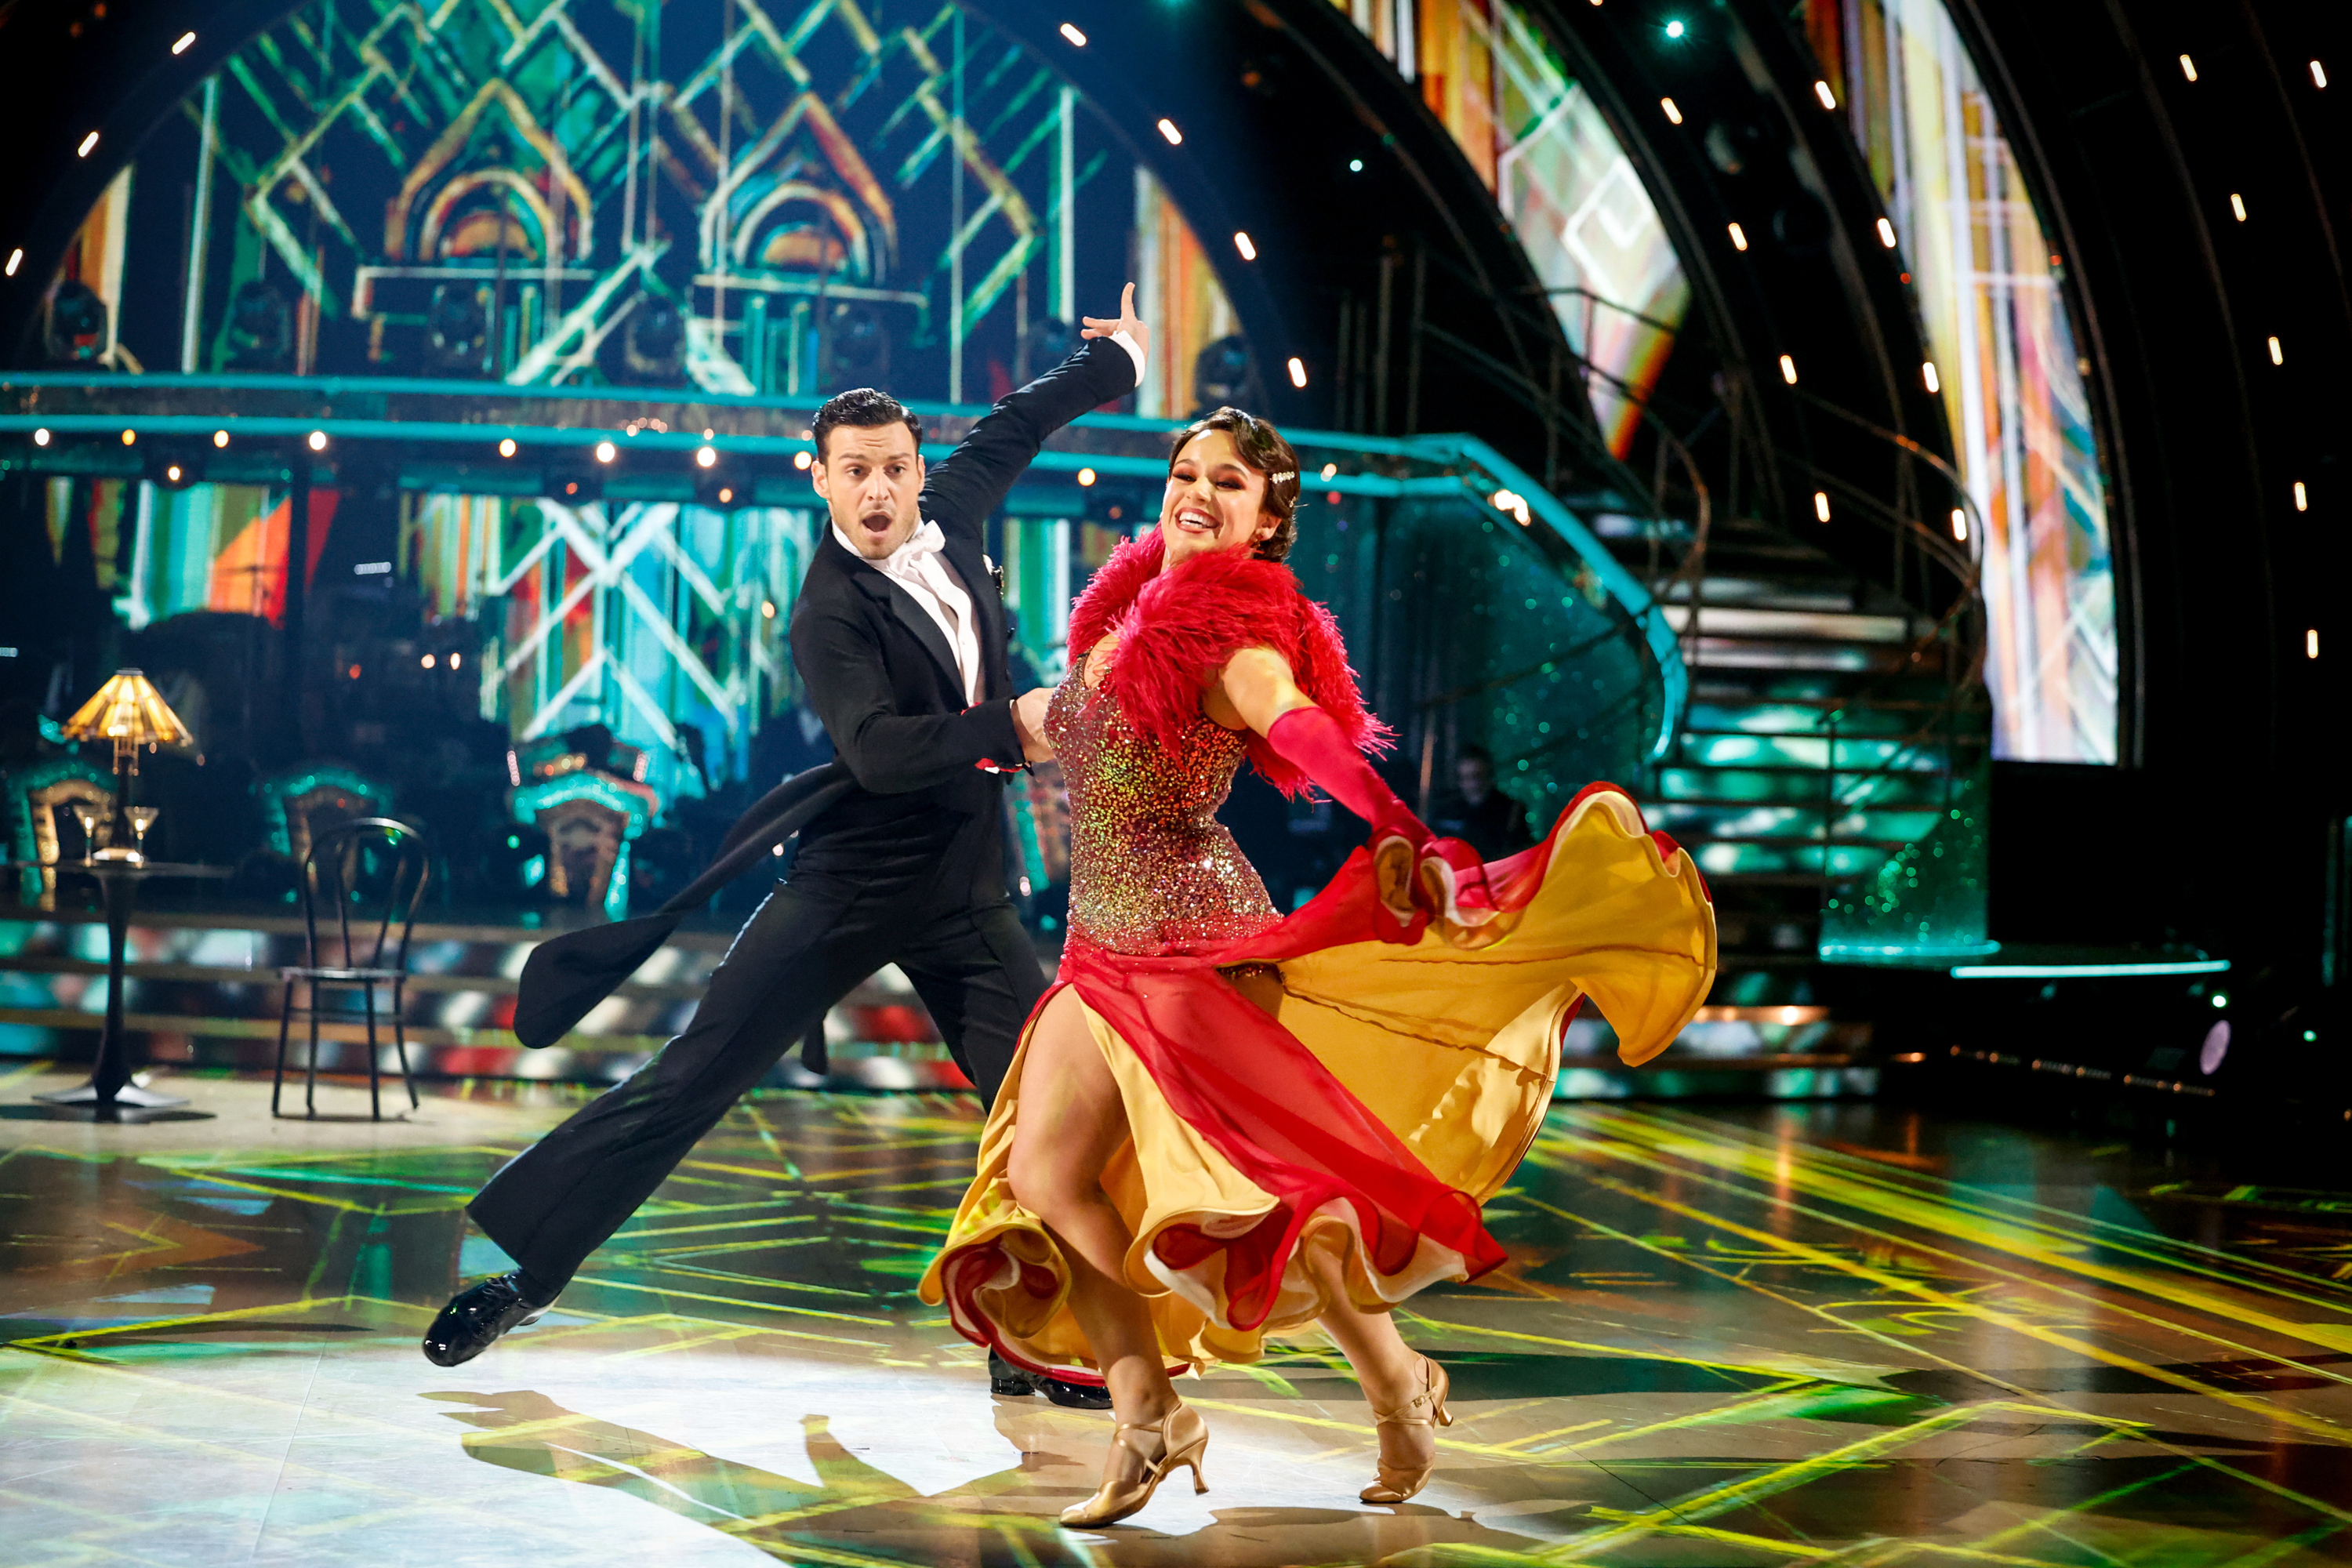 Ellie Leach, who is partnered with Vito Coppola, has joined the Strictly tour